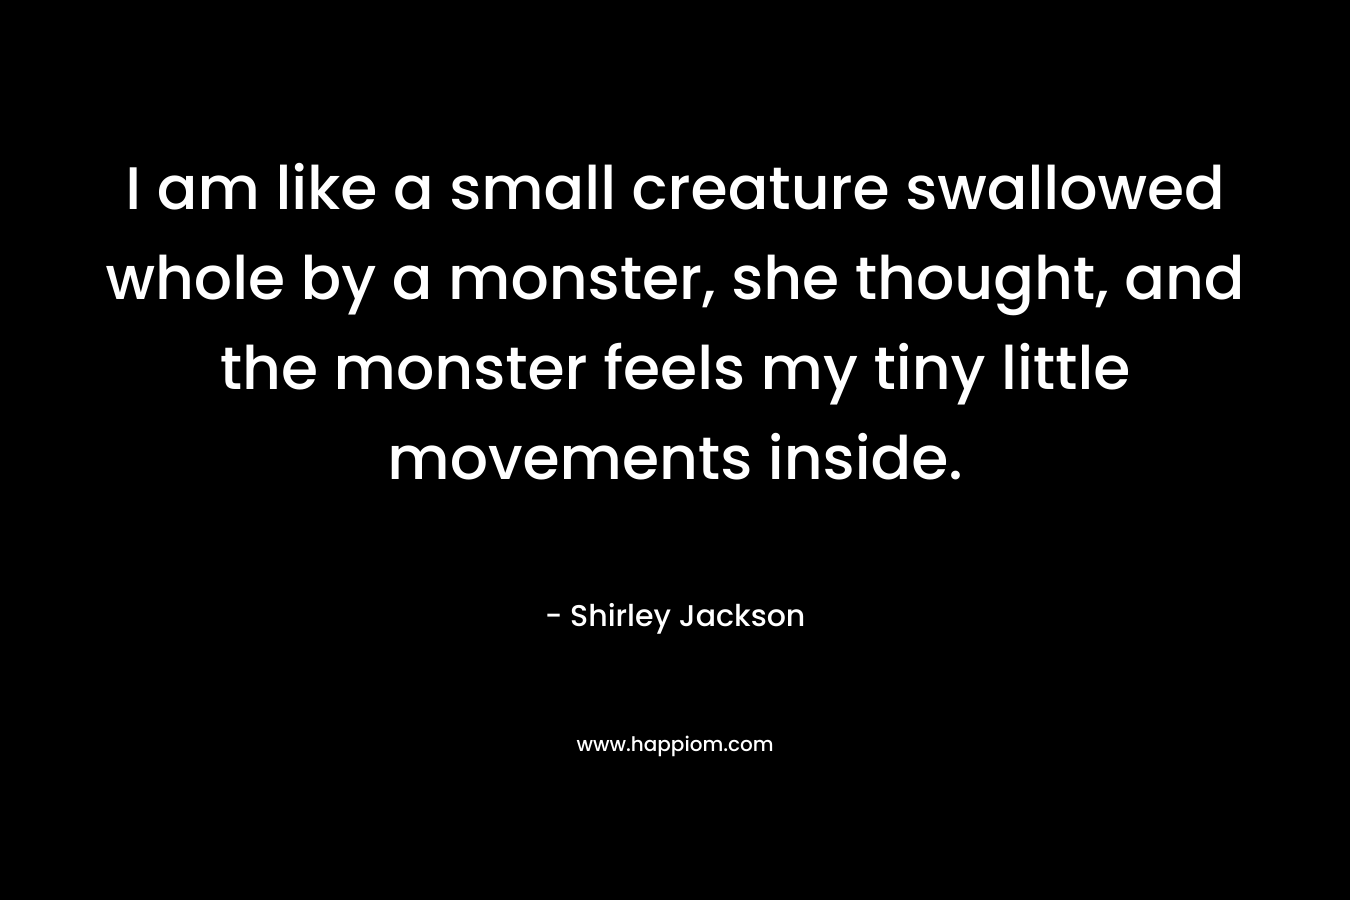 I am like a small creature swallowed whole by a monster, she thought, and the monster feels my tiny little movements inside.